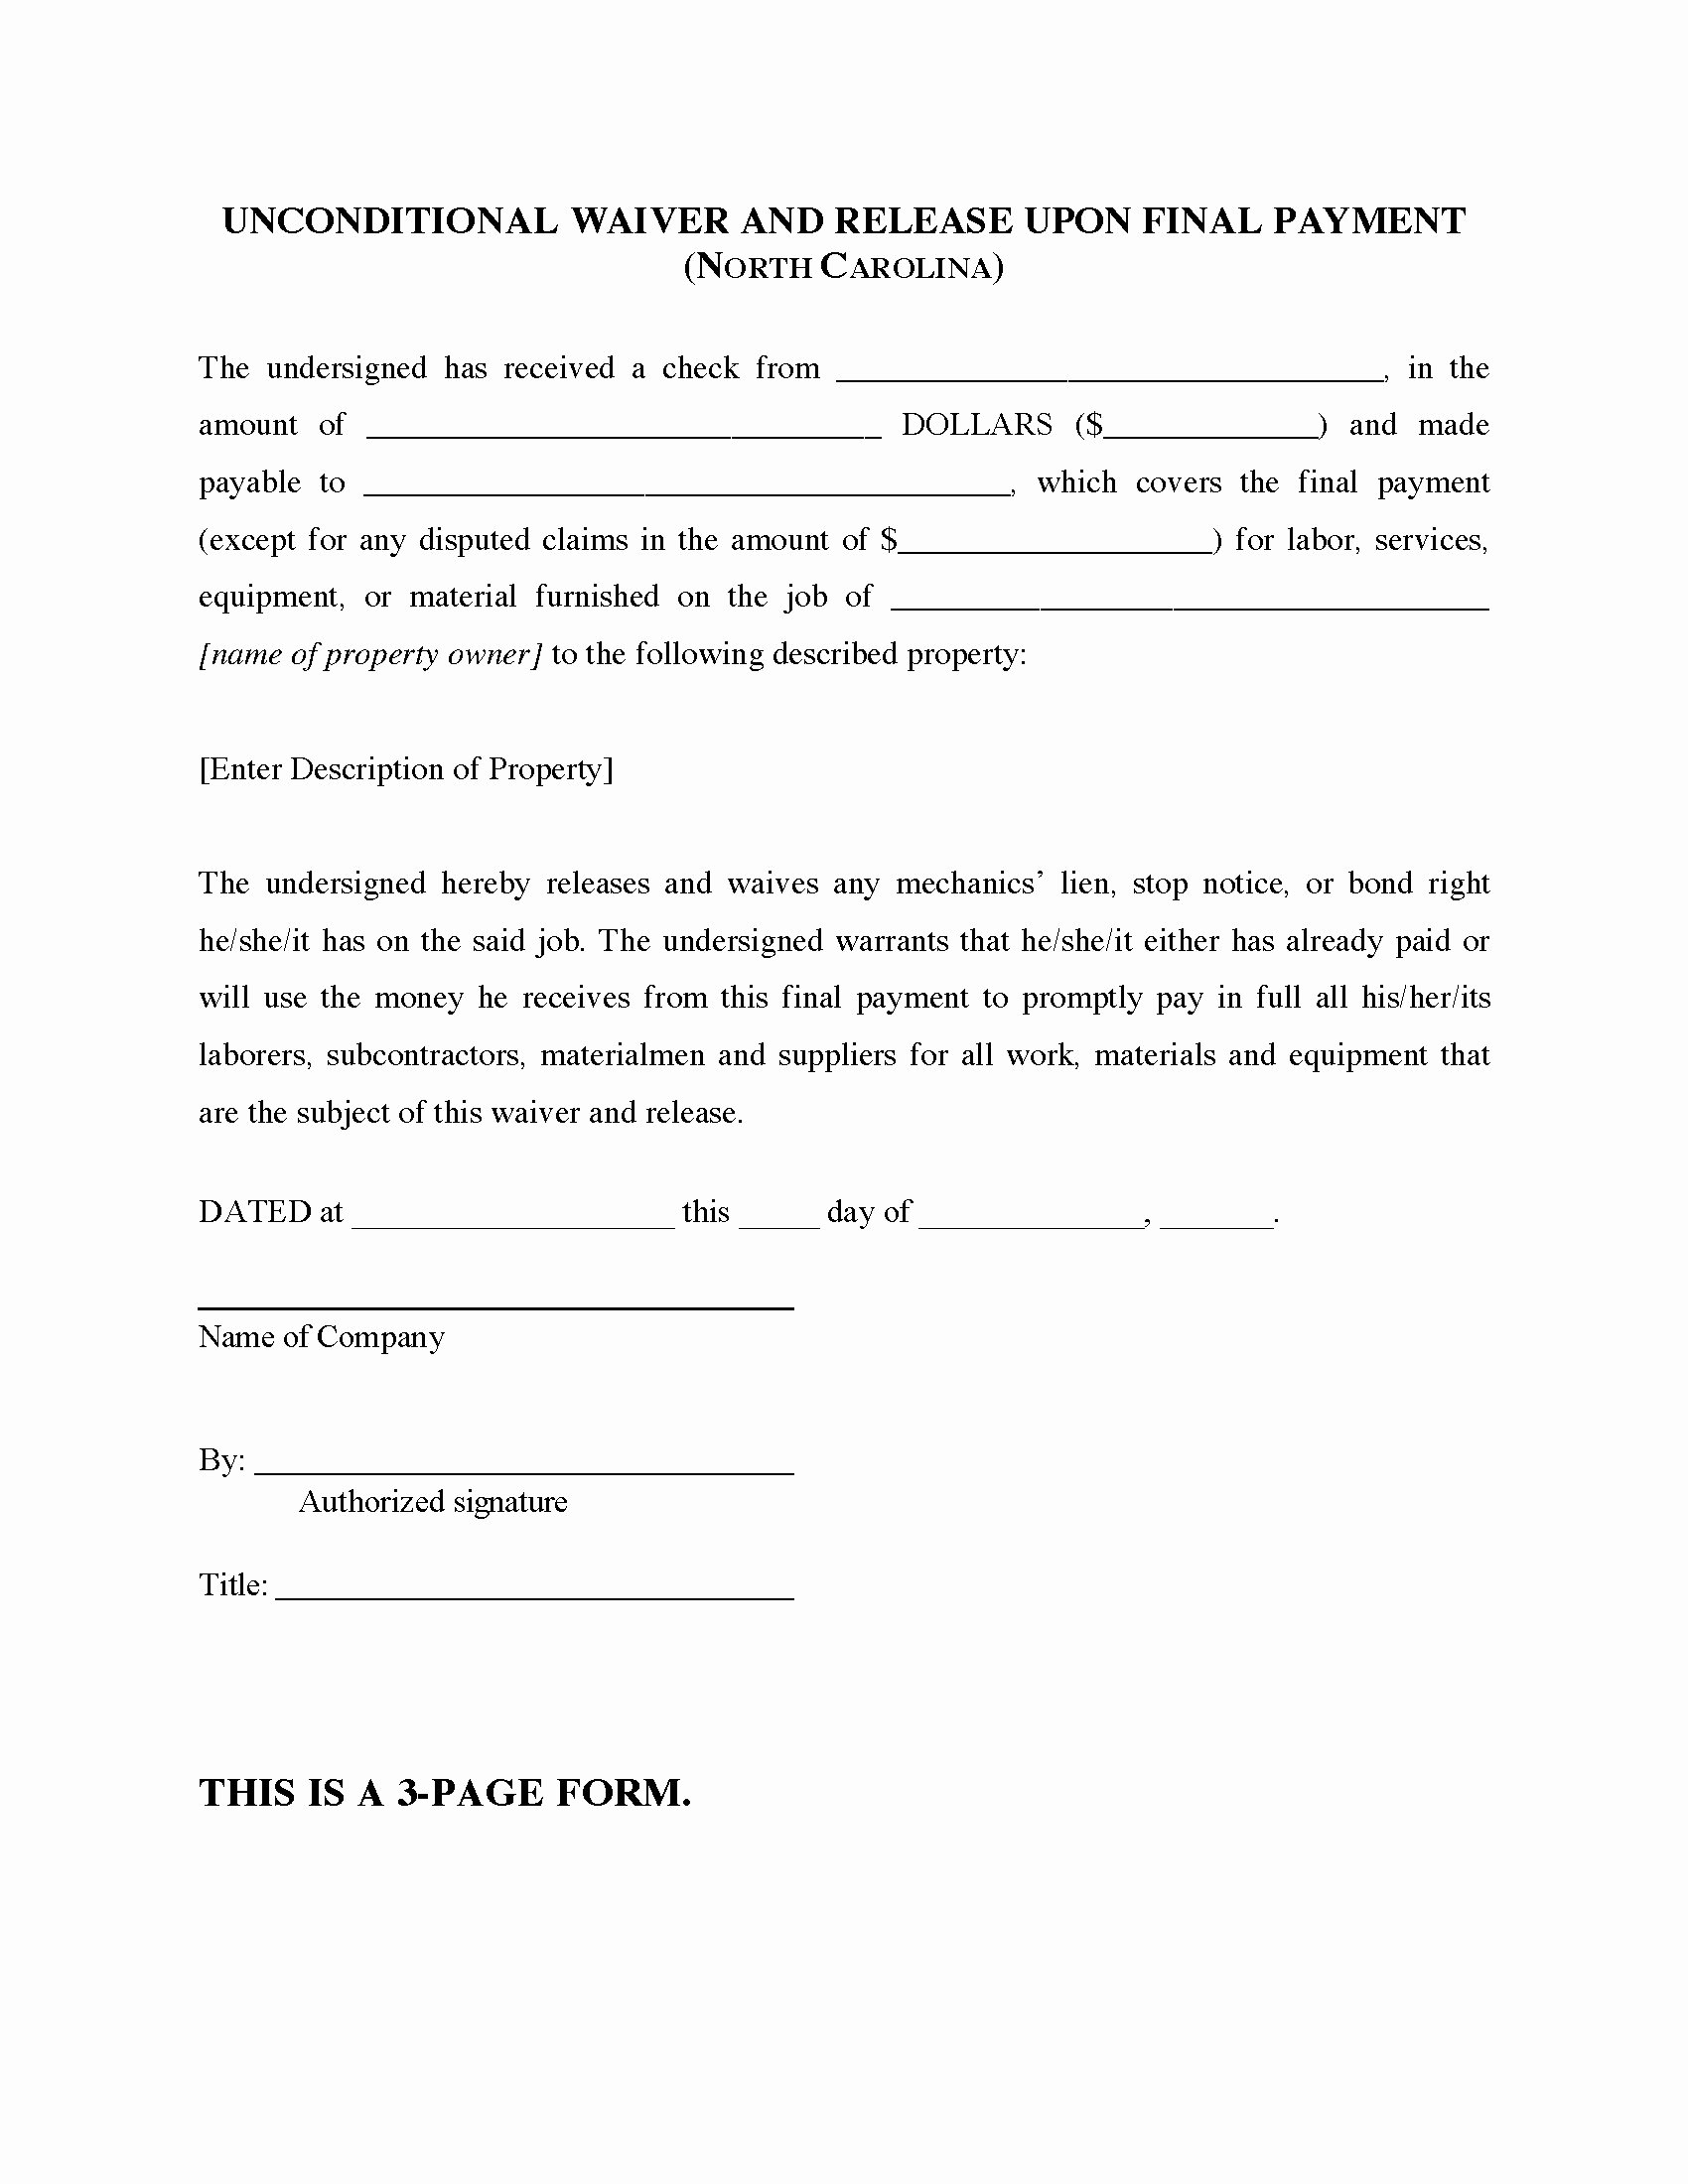 Lien Waiver form Template Unique north Carolina Unconditional Lien Waiver and Release On